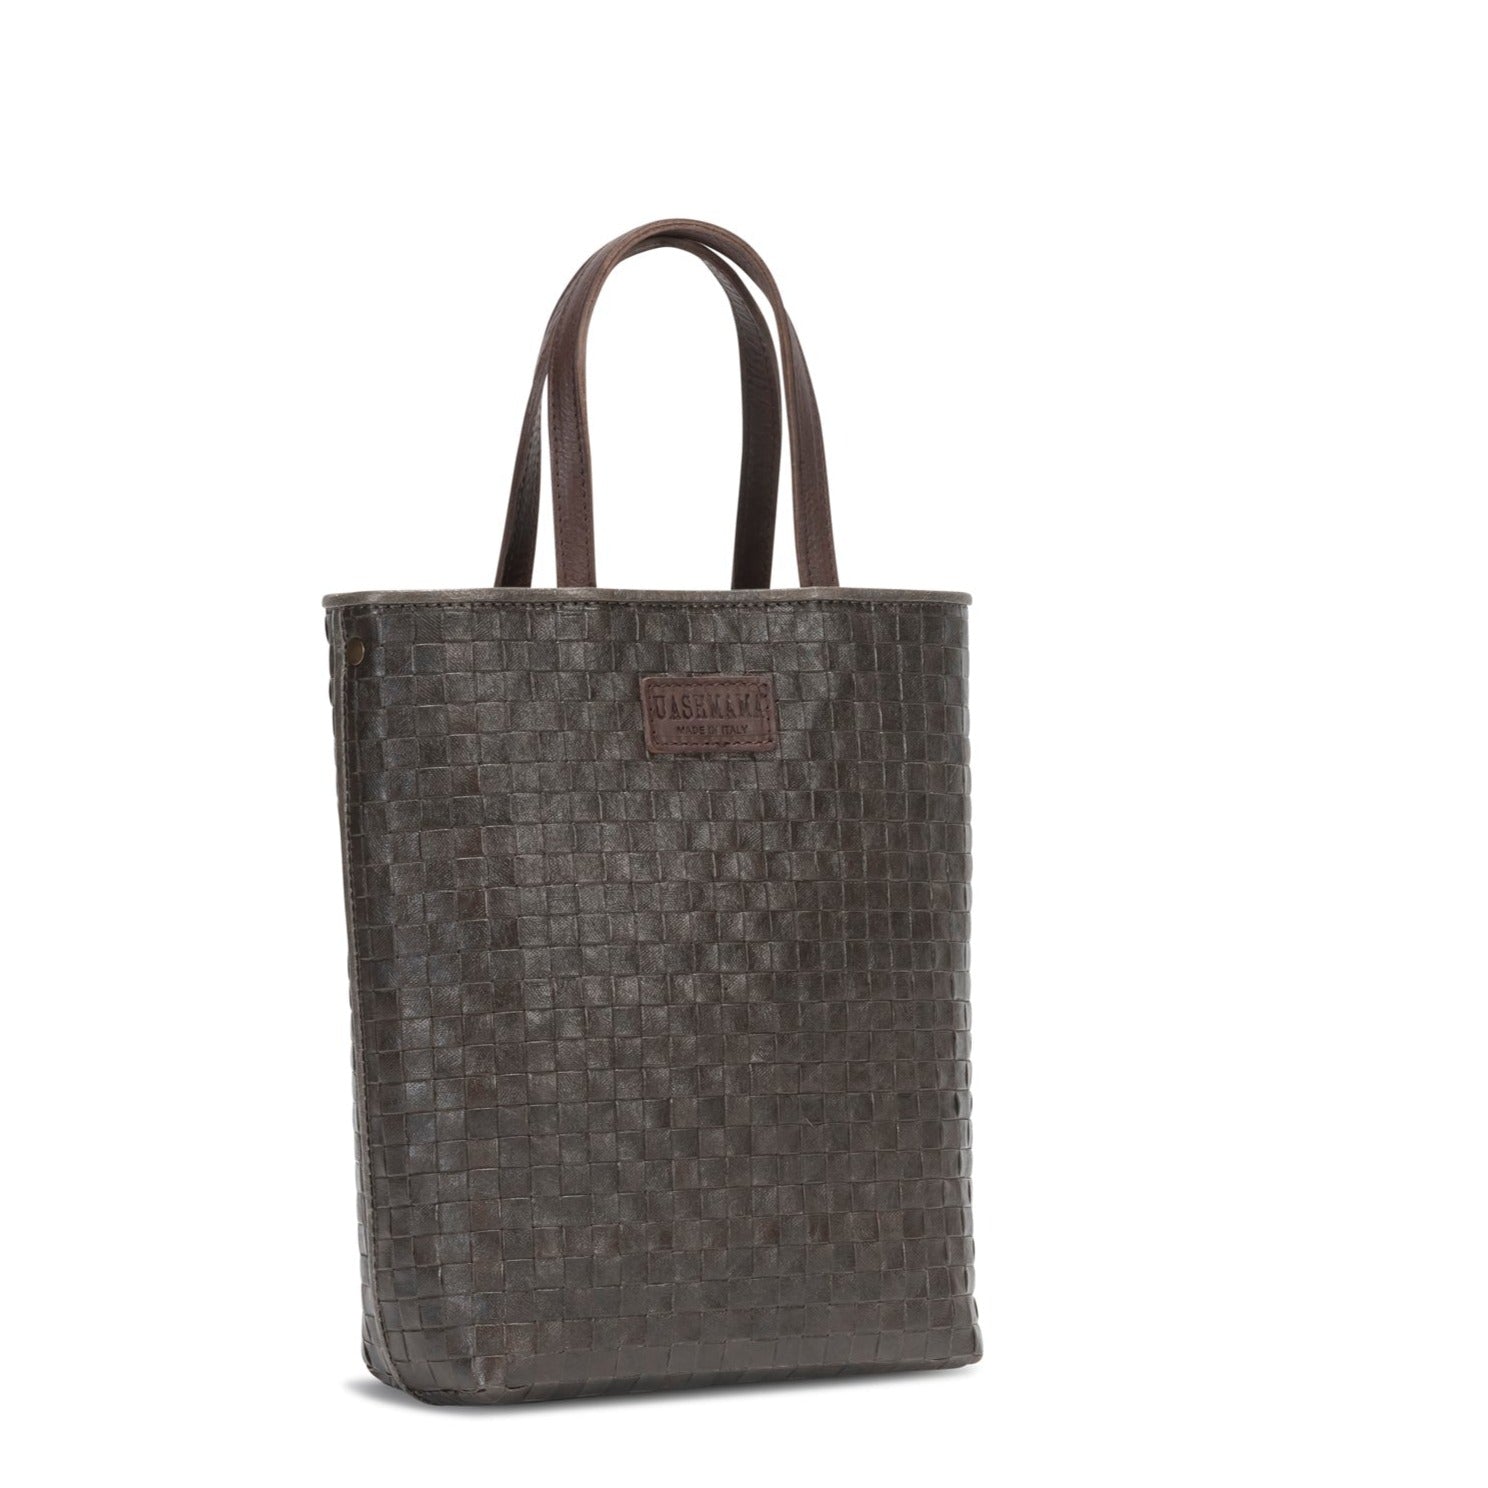 A woven washable tote bag is shown from a 3/4 angle. It has two top handles and is grey-brown in colour.